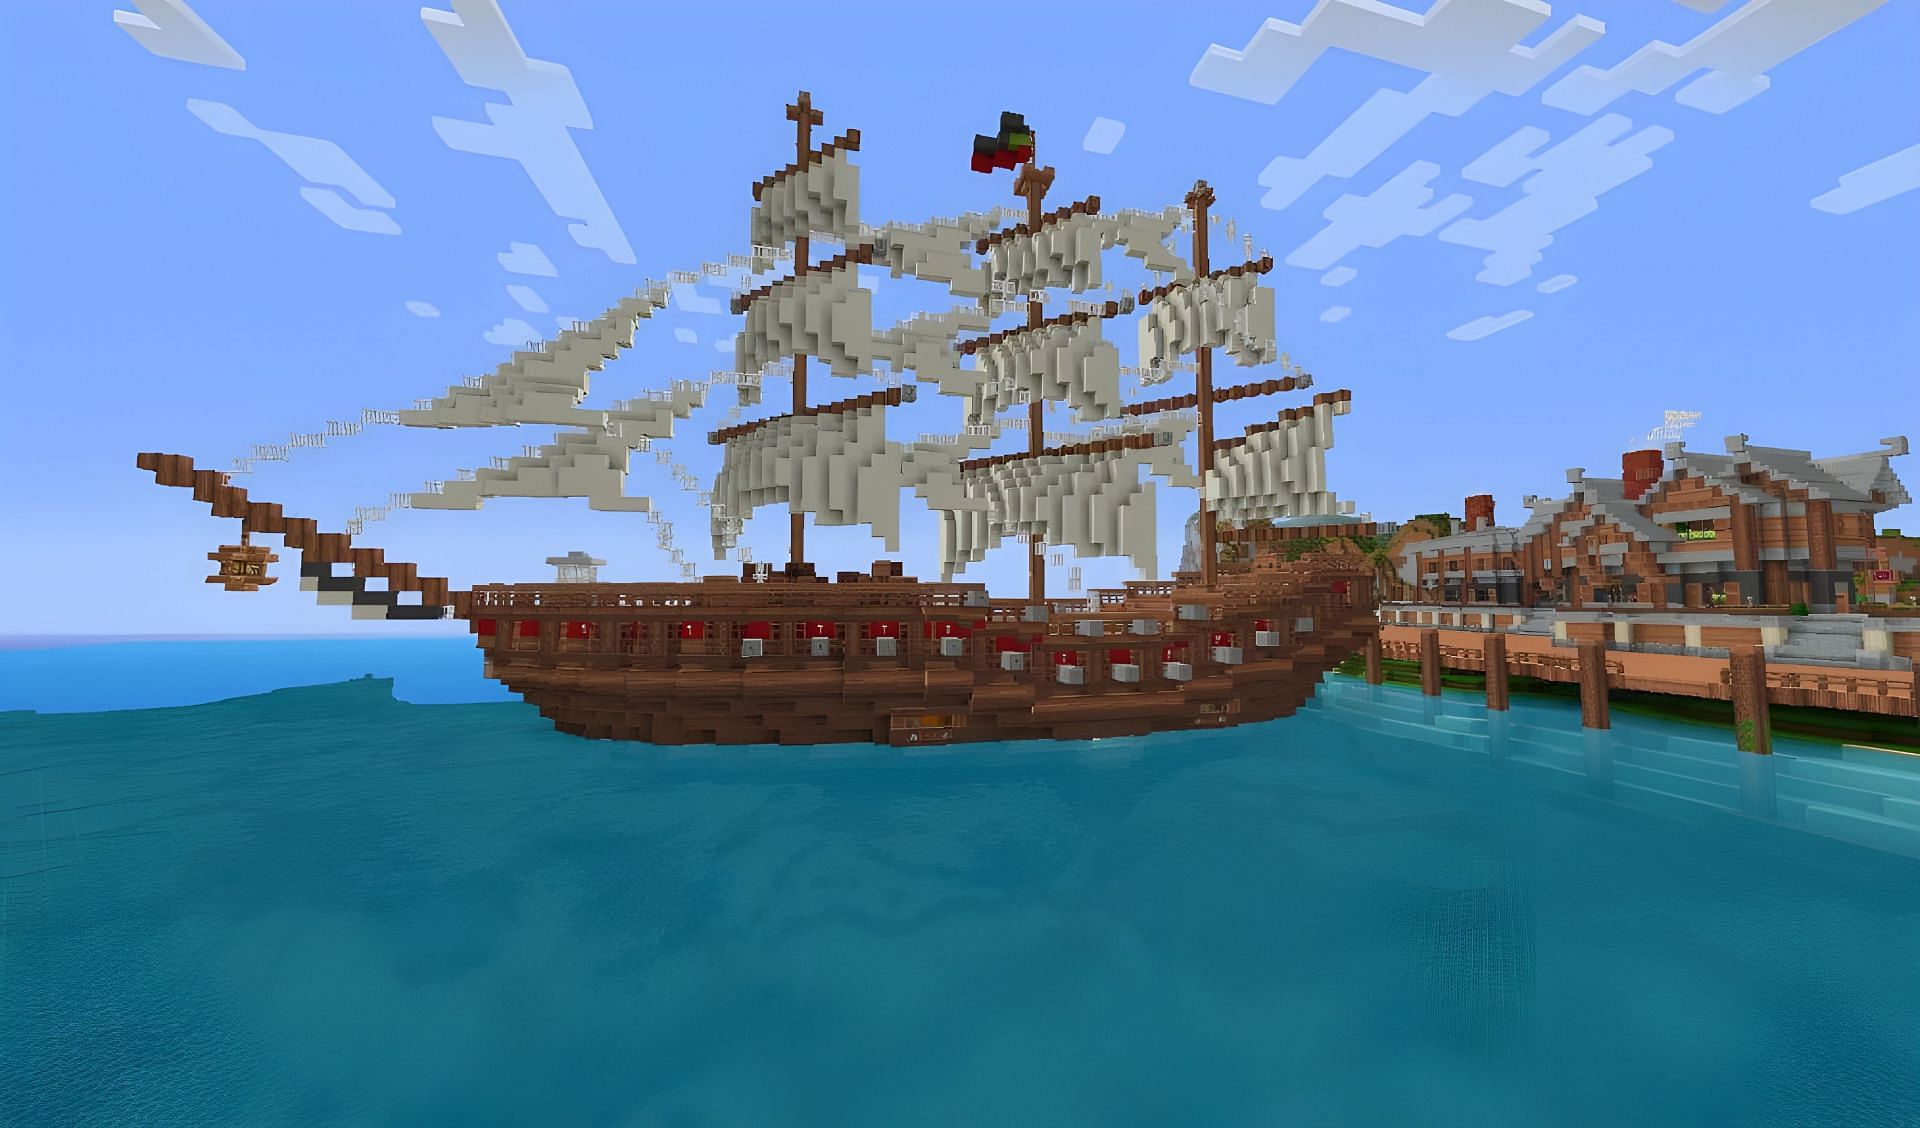 Boat builds are spectacular Minecraft creations (Image via Reddit)